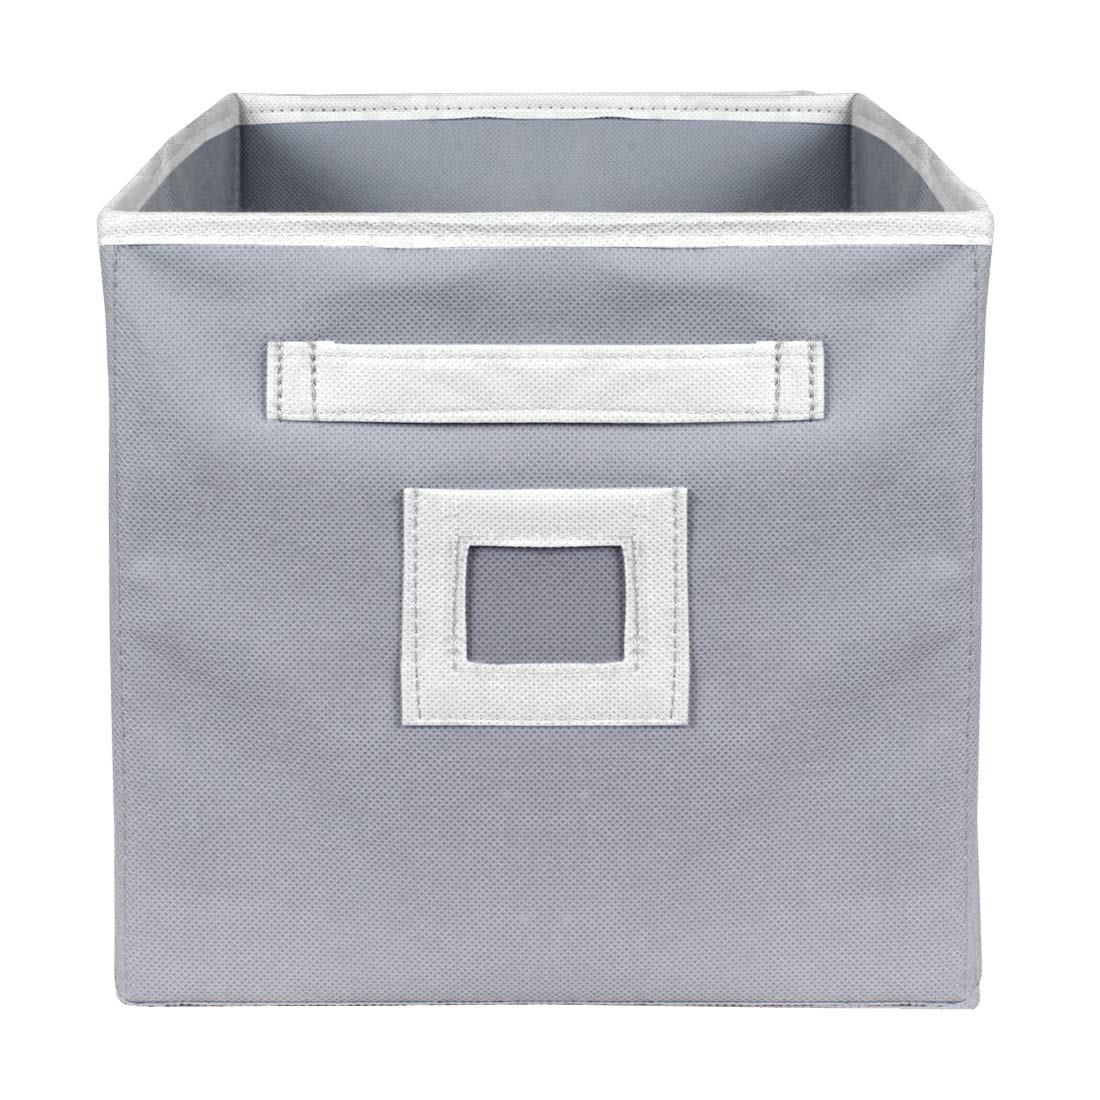 Kuber Industries Non Woven Fabric Foldable Storage Cube Toy, Books, Shoes Box with Handle (Grey, Extra Large) - KUBMART2121-2 Pieces